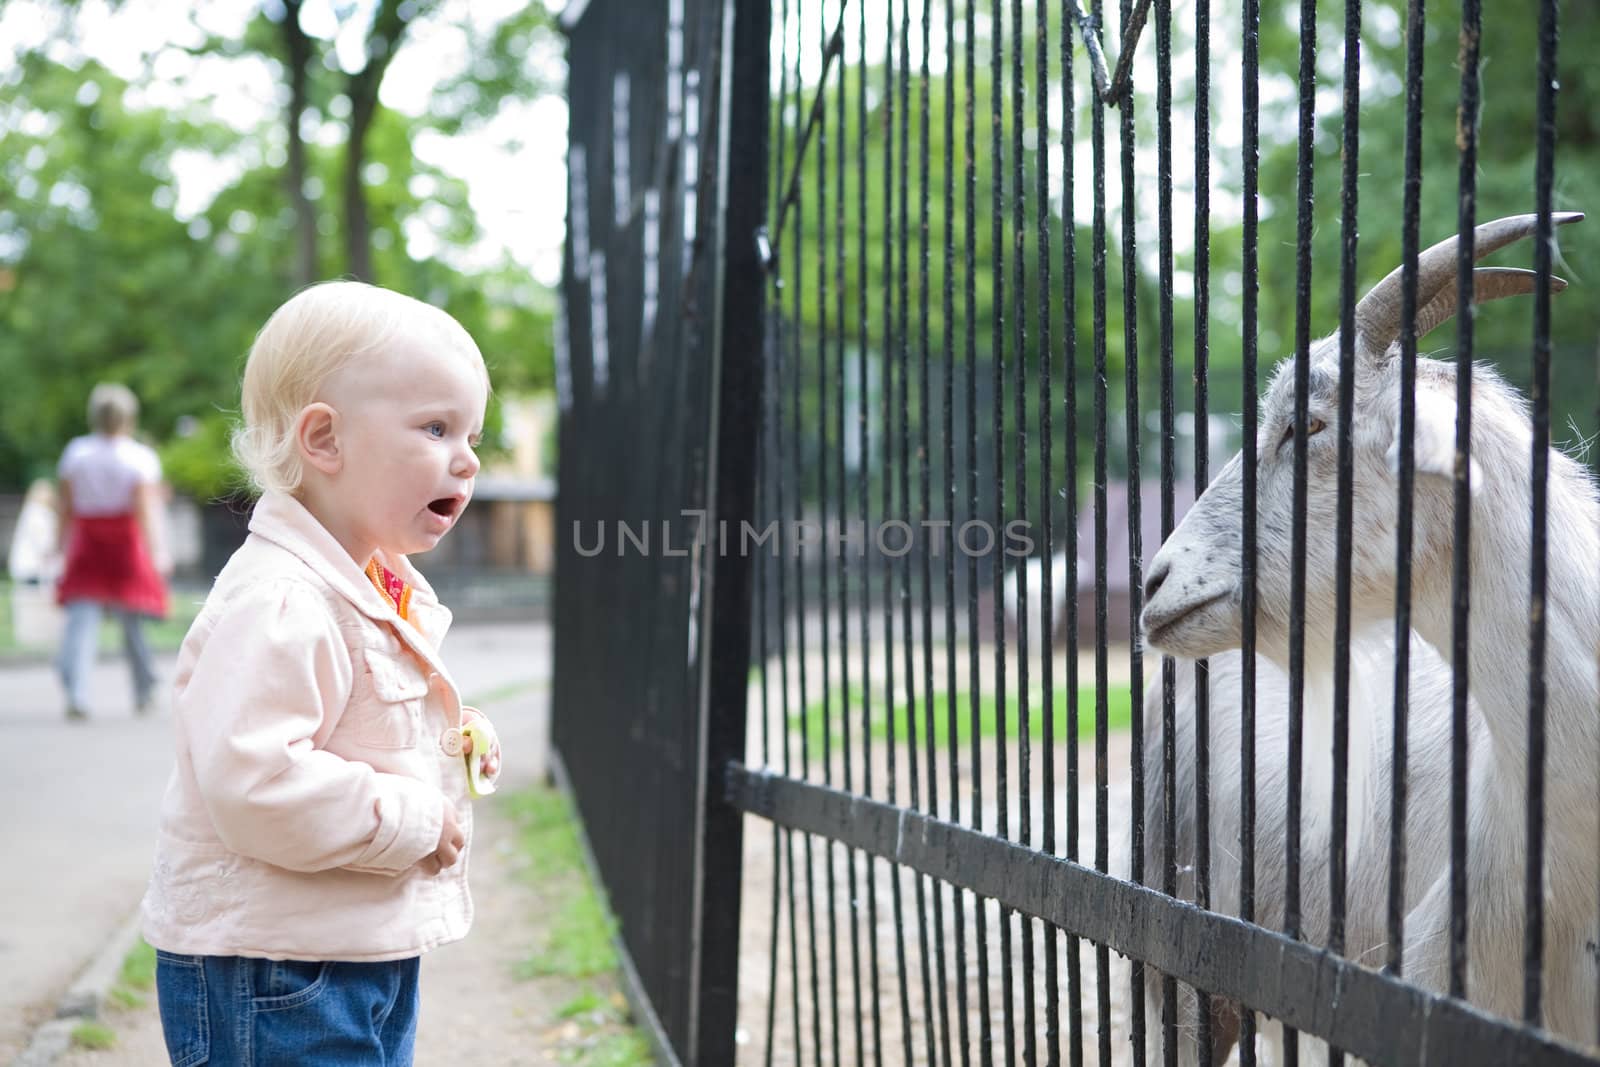 small girl looking at the goat at the zoo